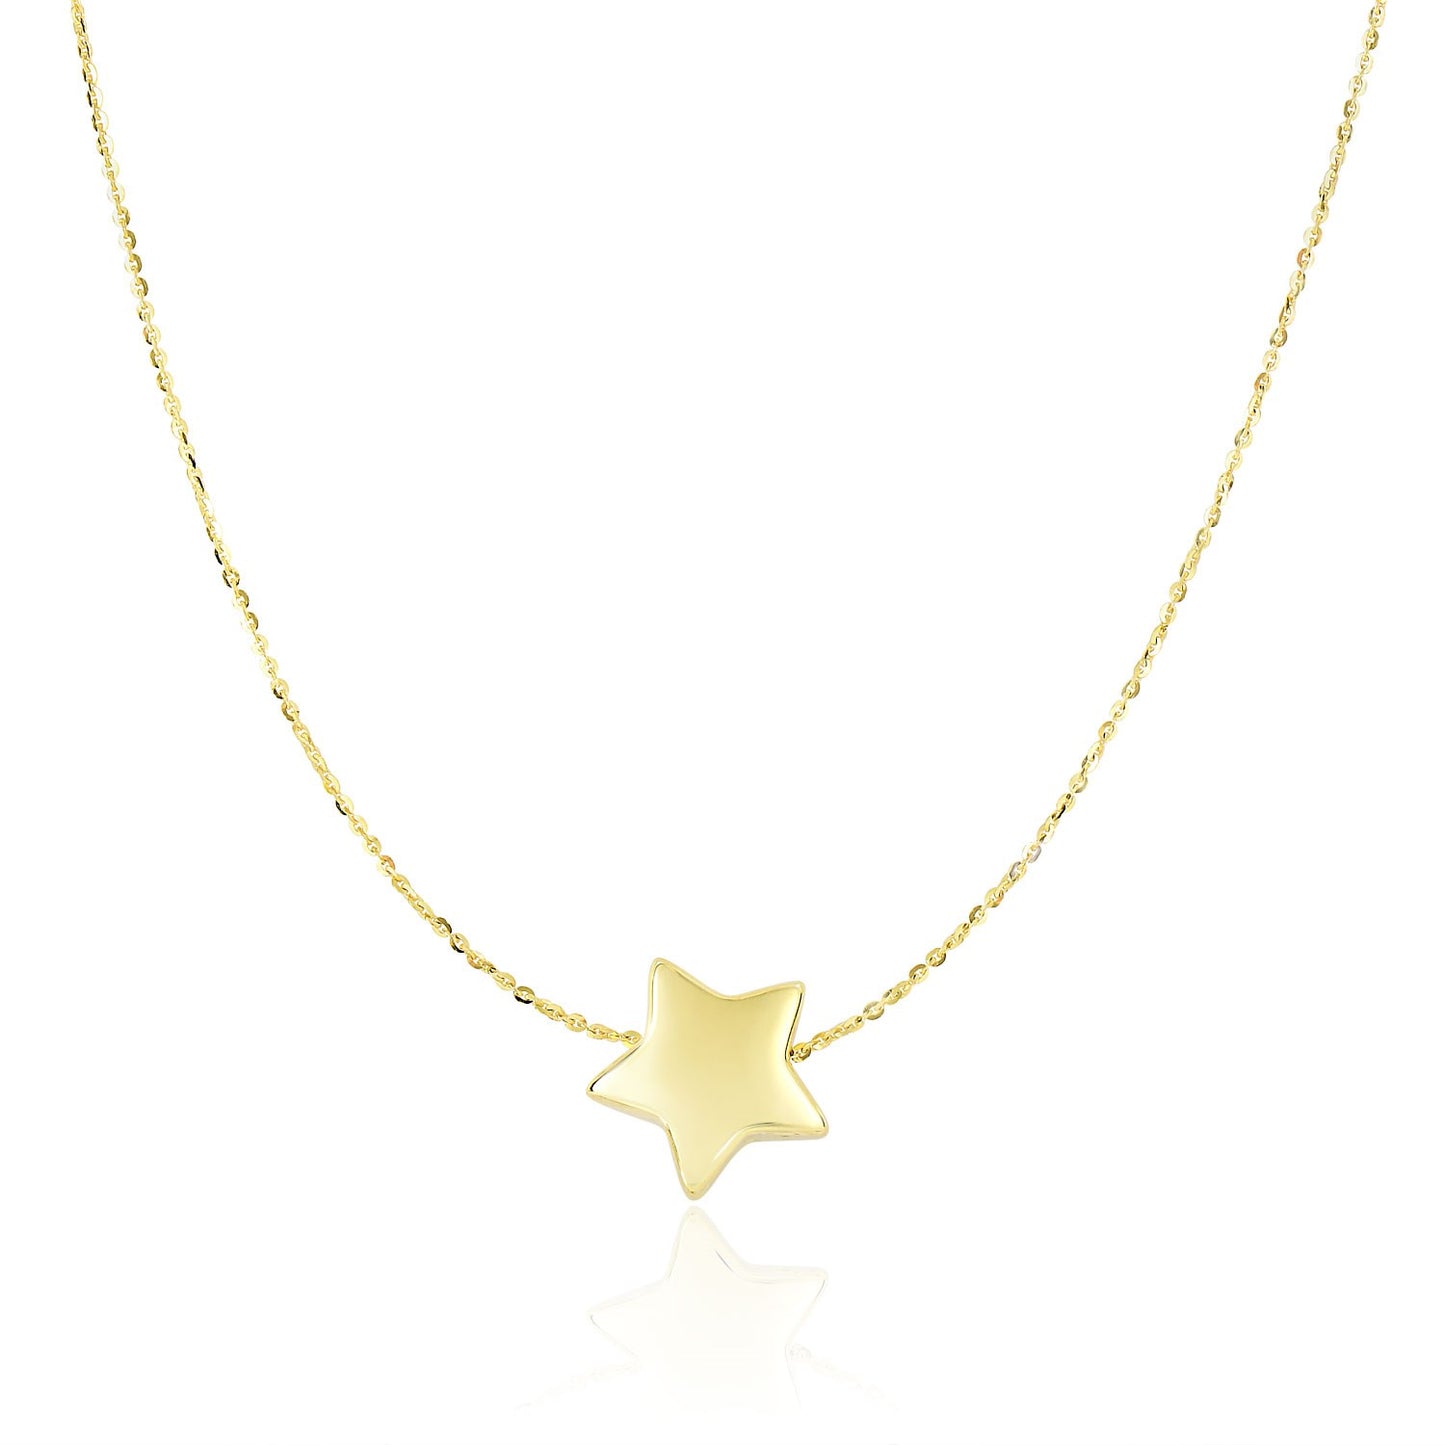 14k Yellow Gold Necklace with Shiny Puffed Sliding Star Charm